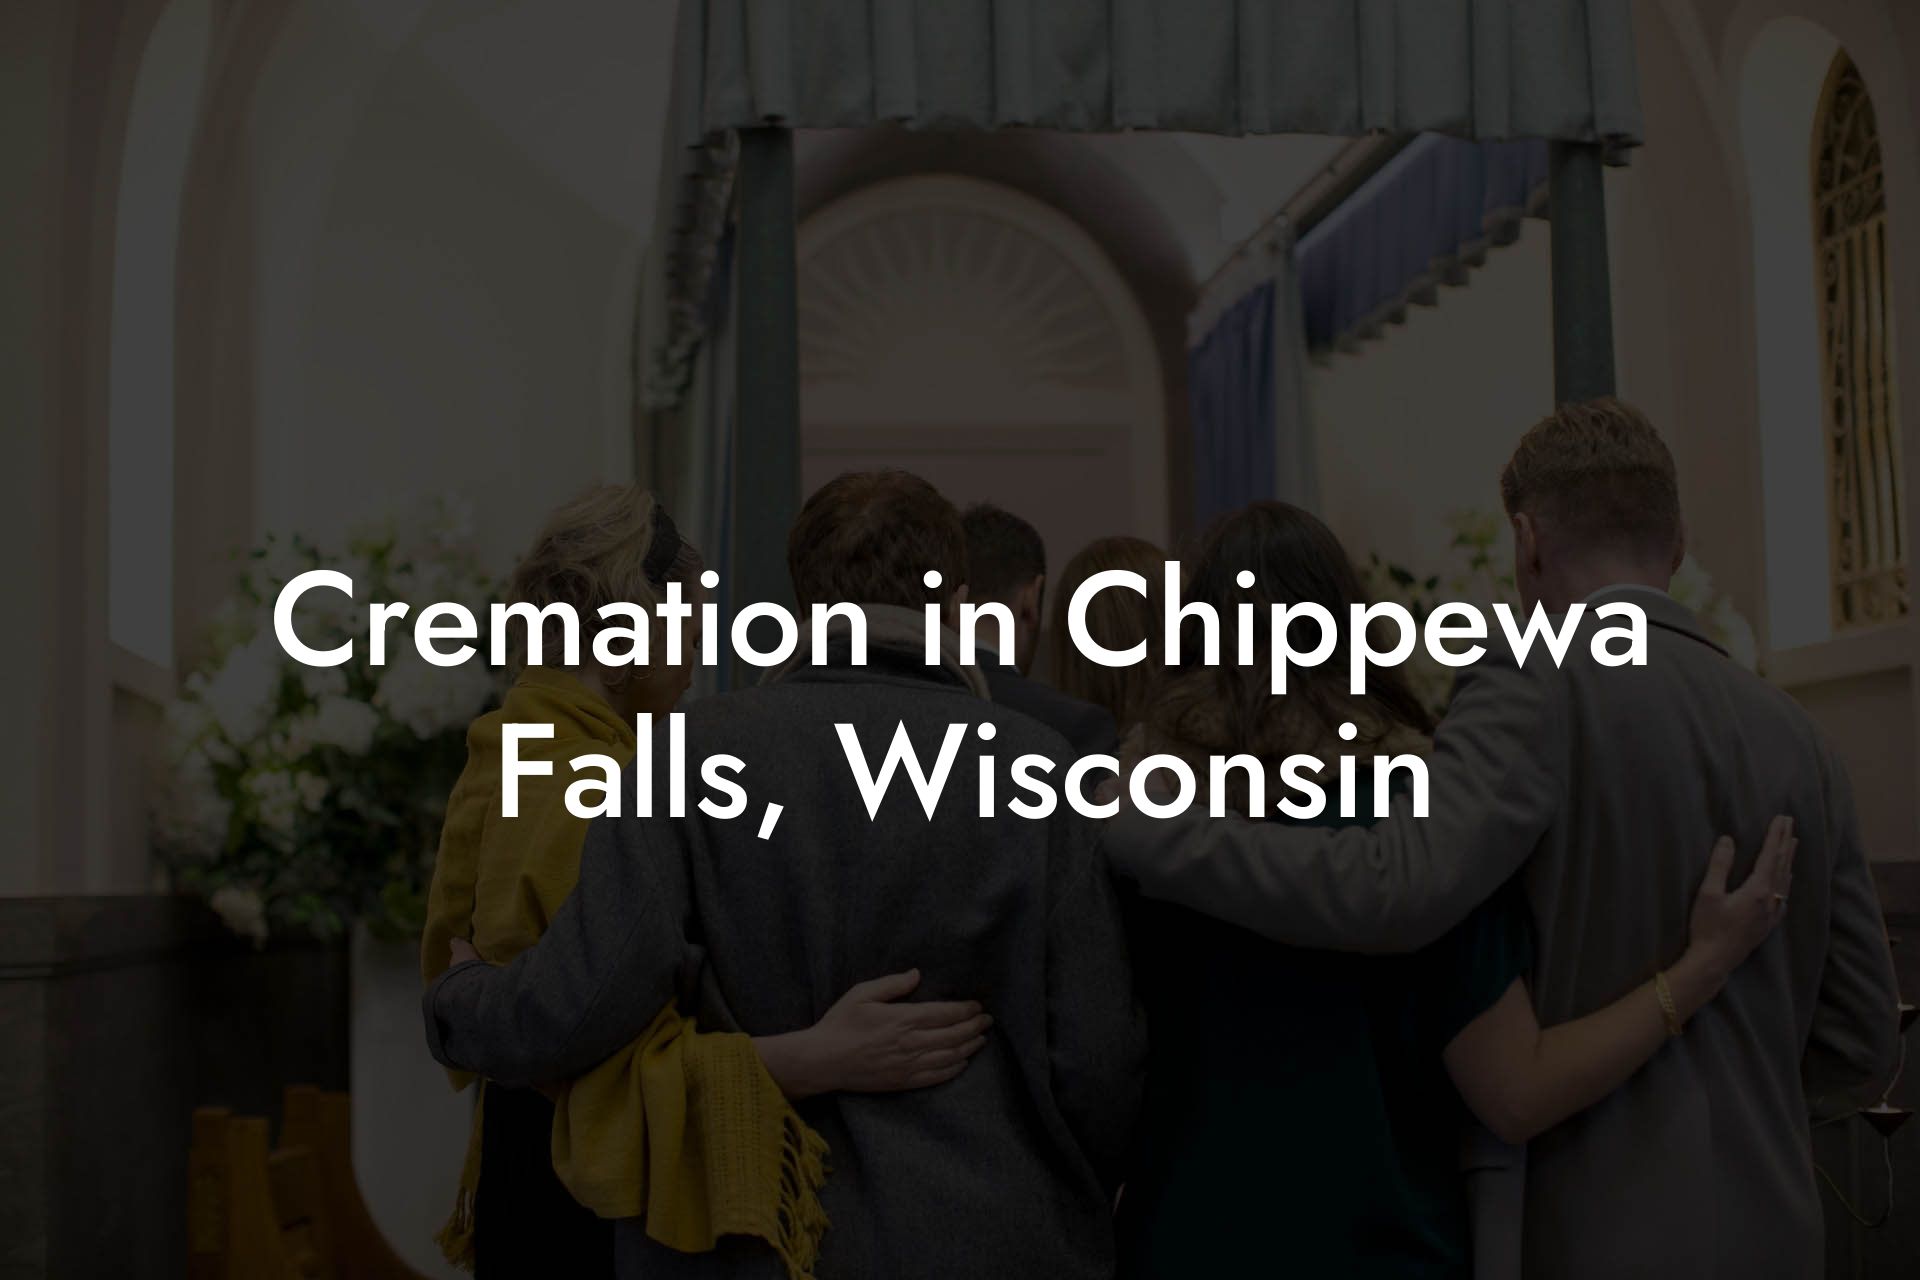 Cremation in Chippewa Falls, Wisconsin